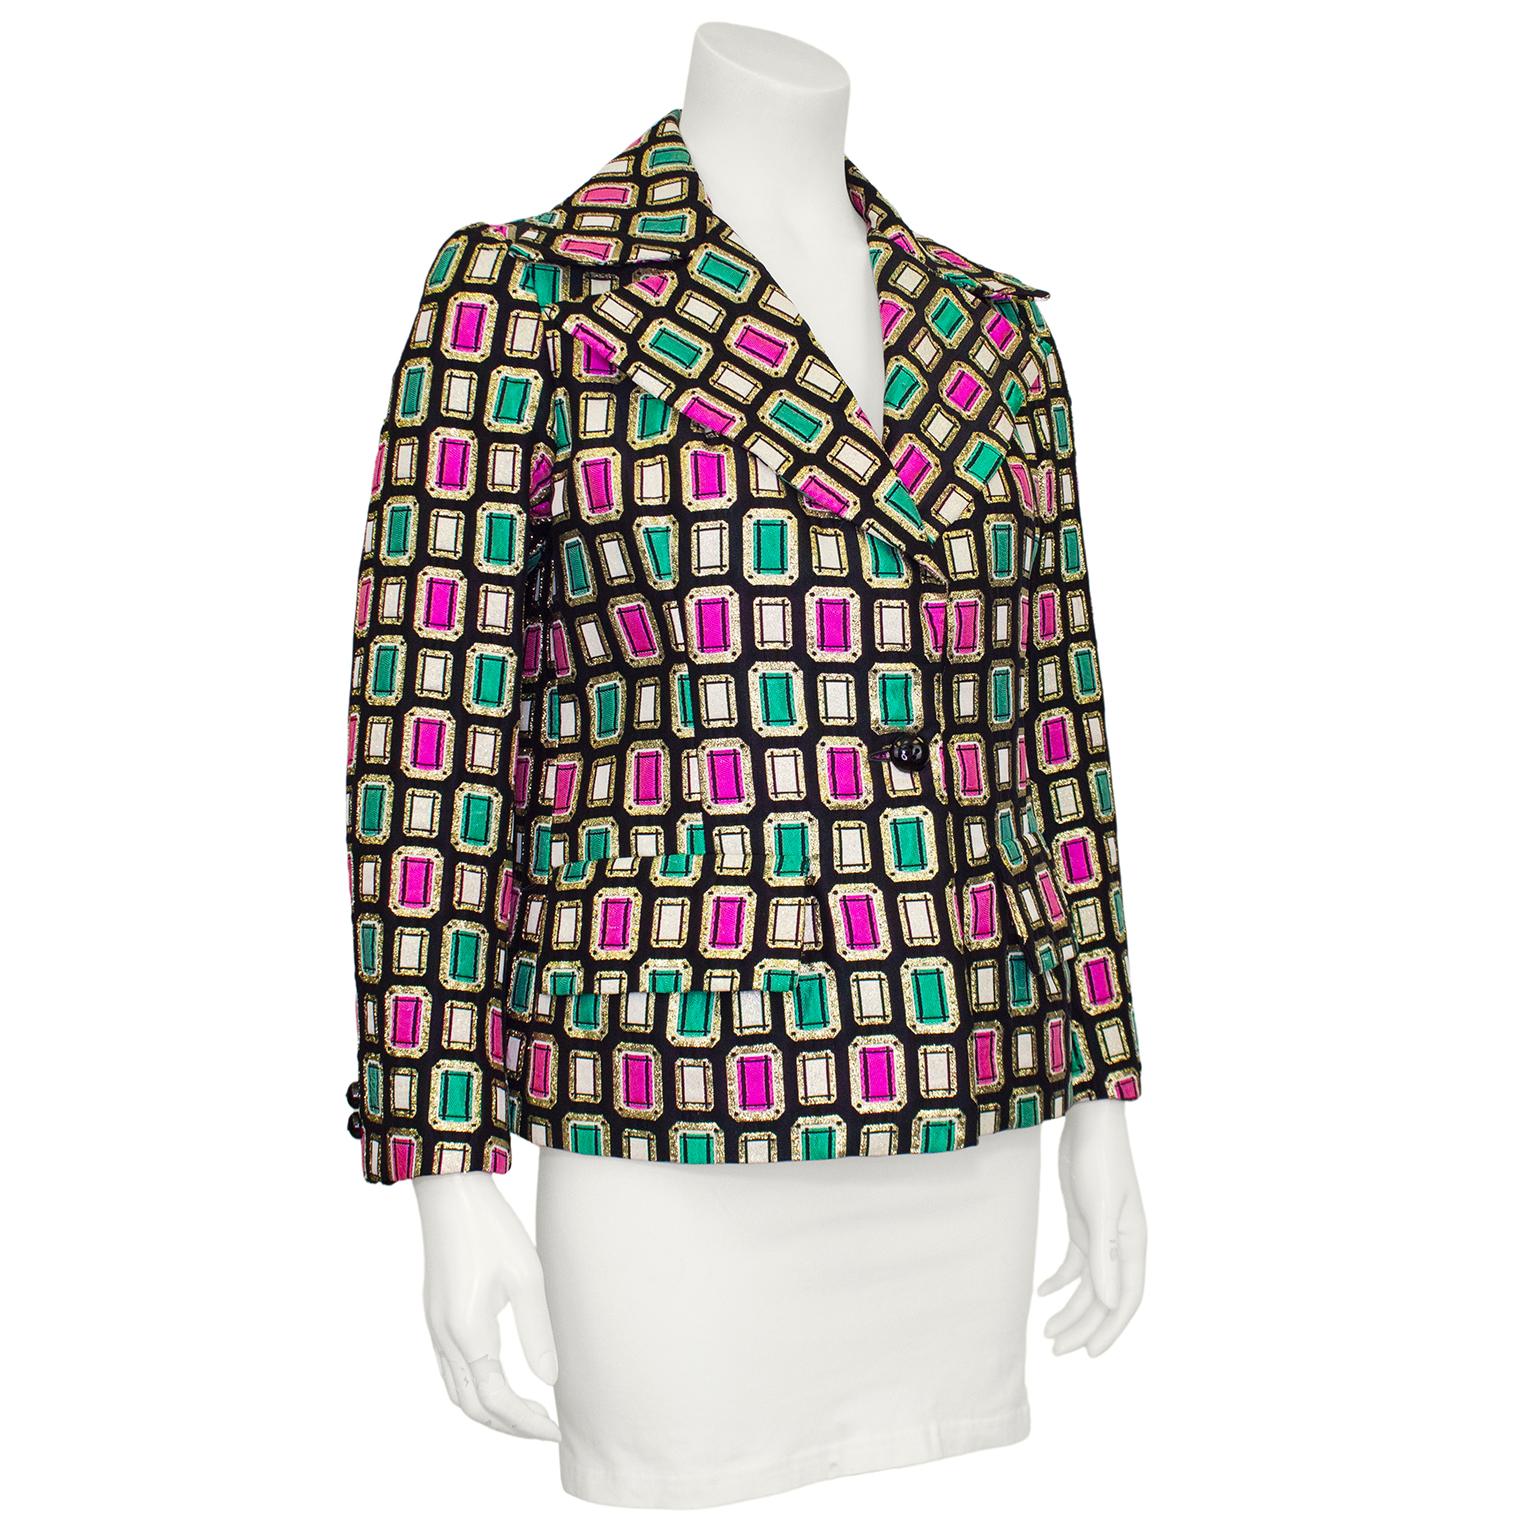 Lovely Jaeger brocade jacket from the 1970s. Black with contrasting gold, white, green and pink emerald cut graphic jewel pattern. Notched collar, single button, bracelet length sleeves and flap pockets at hips. Back side seams feature a panel of